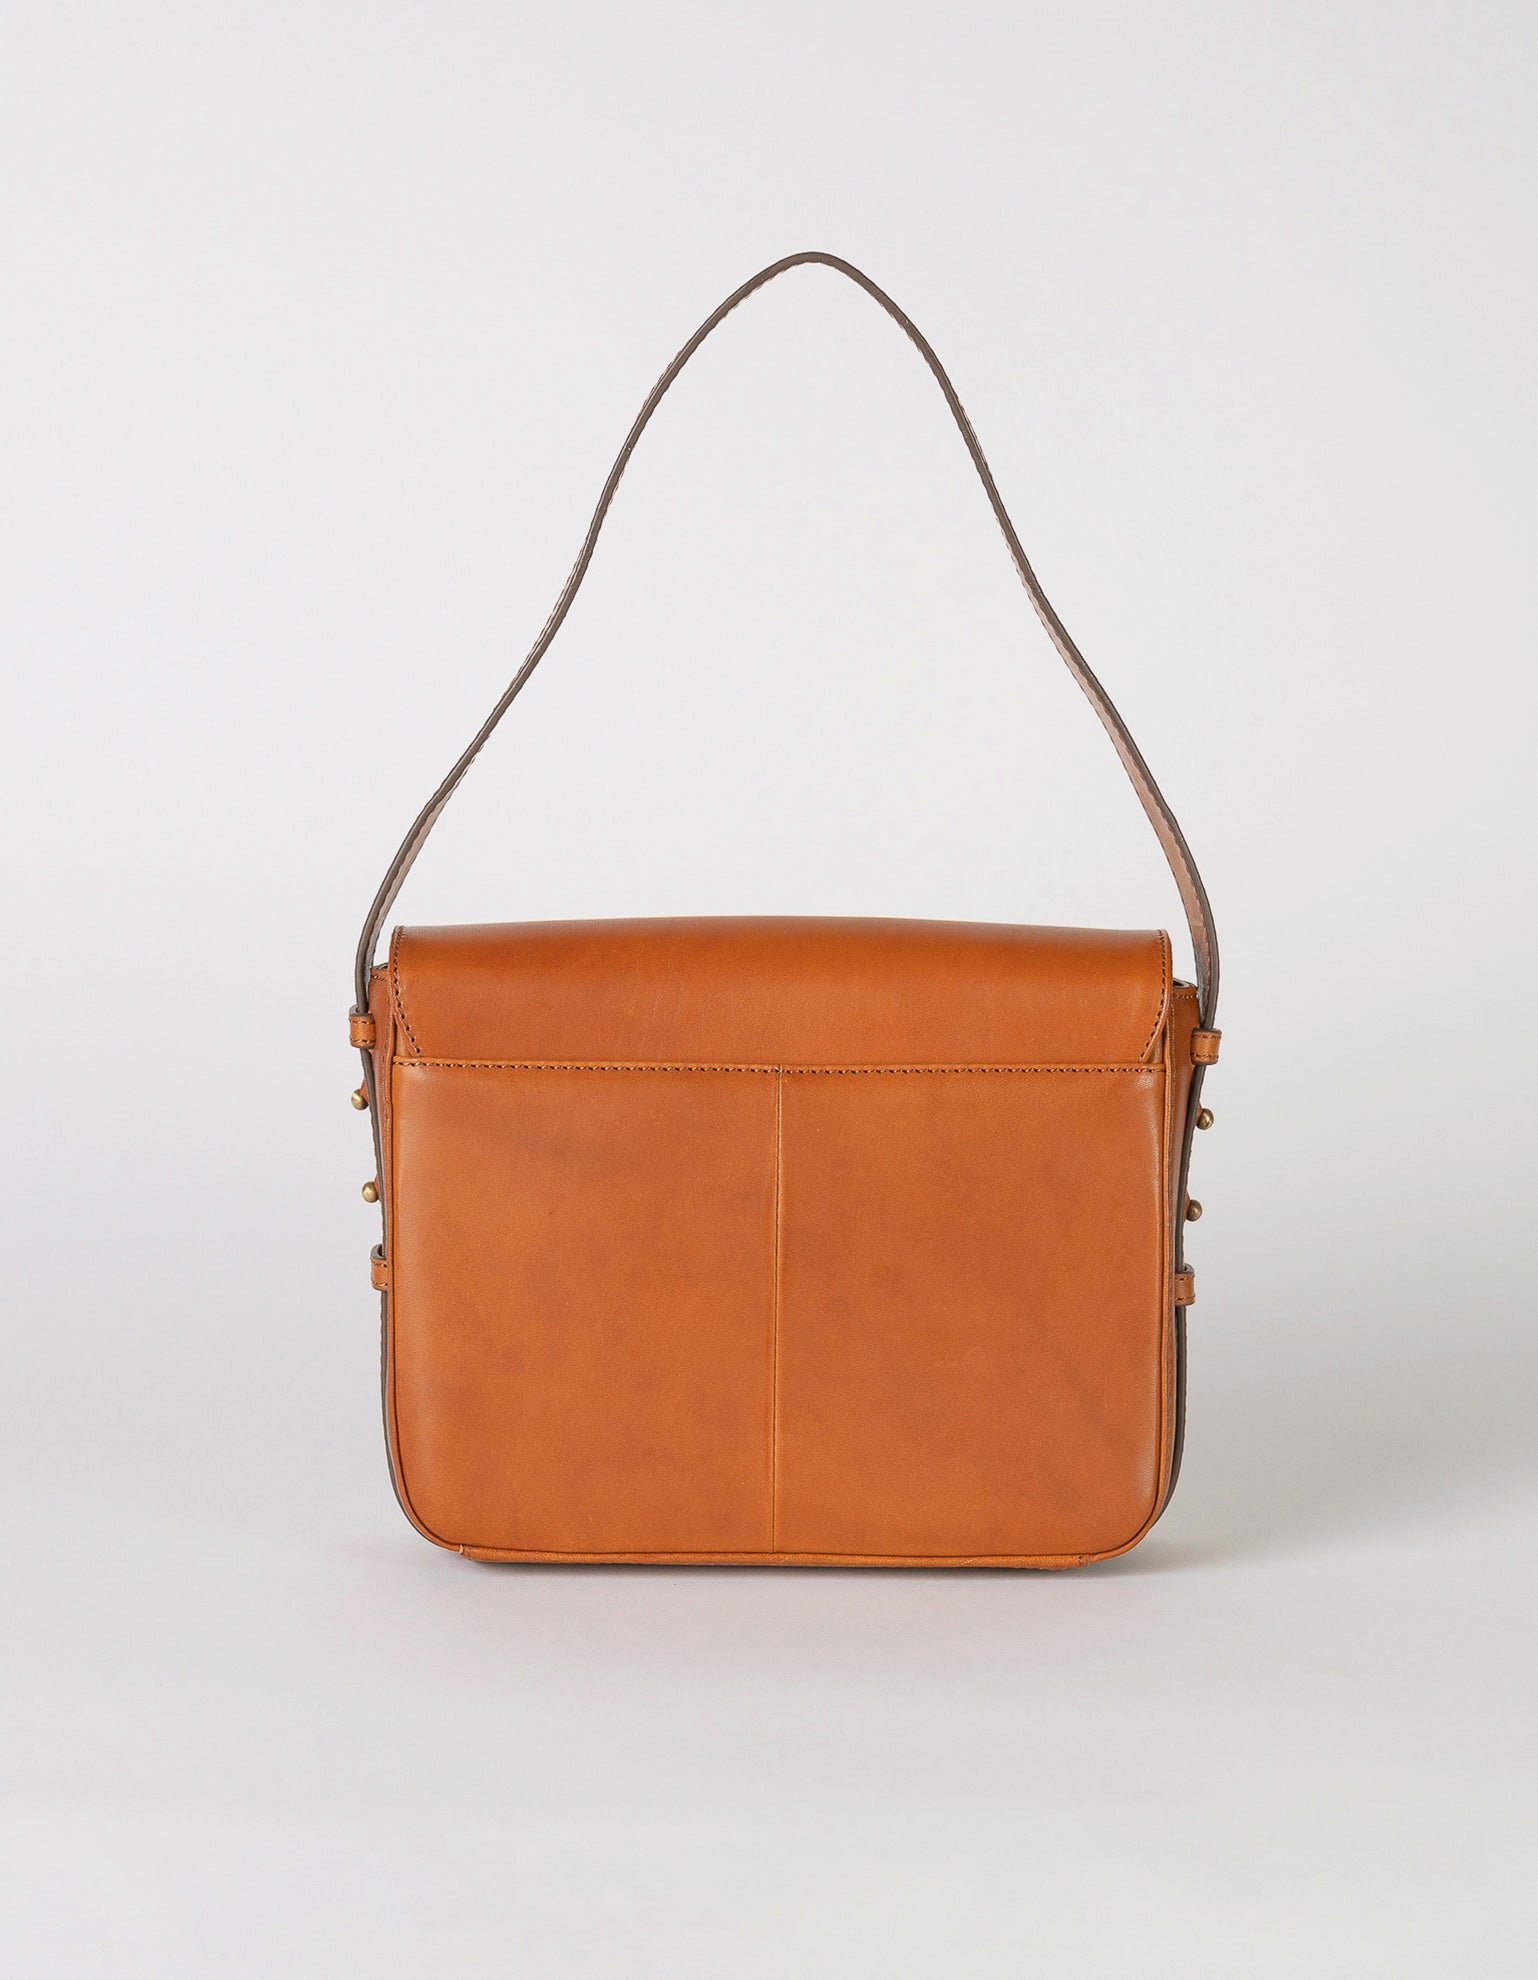 Cognac Leather womens handbag. Square shape with an adjustable strap. Back product image.